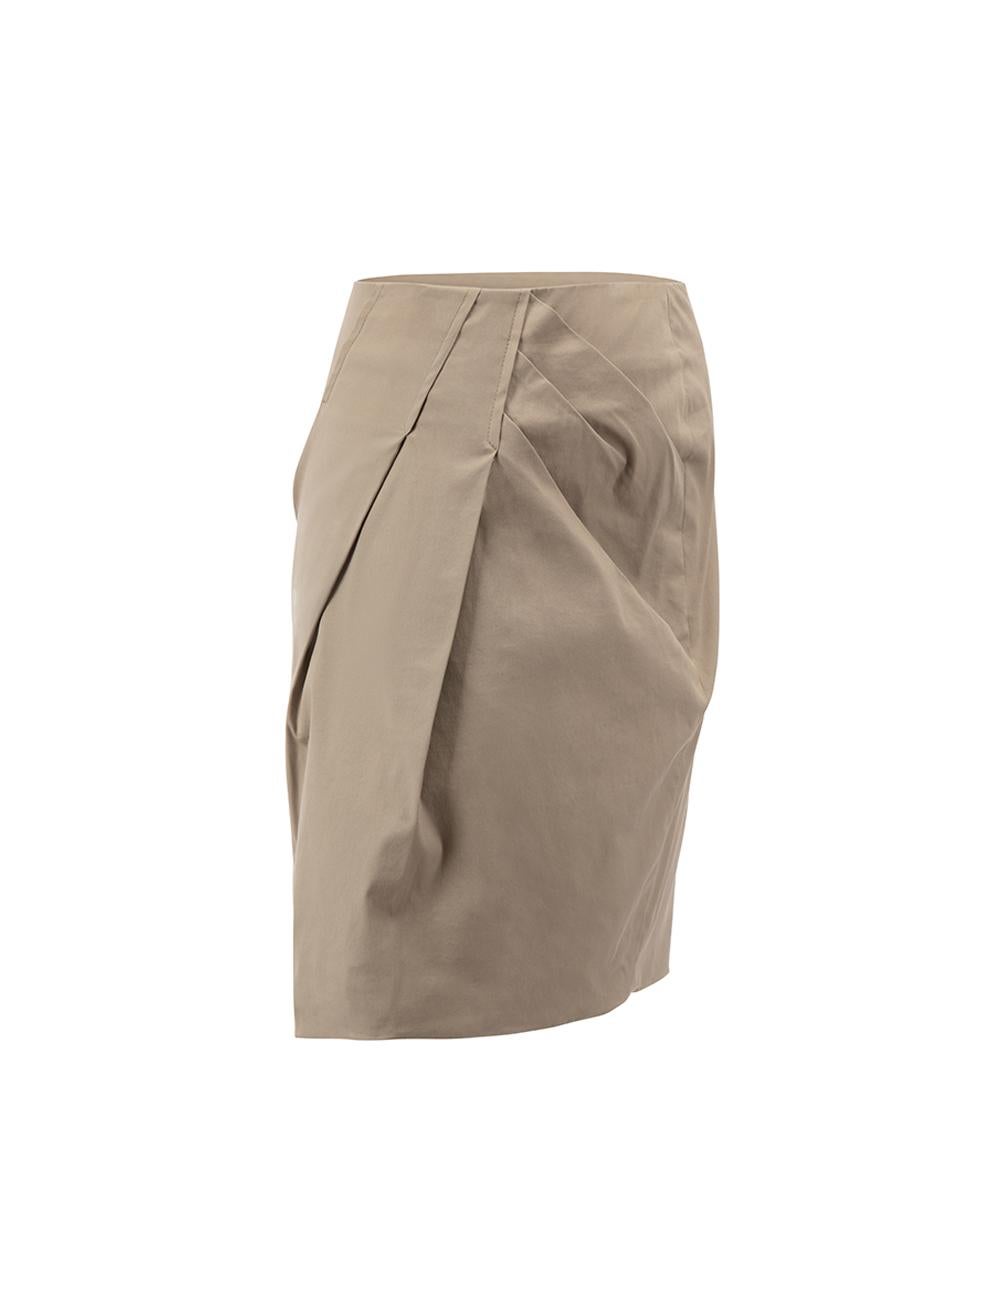 CONDITION is Good. General wear to skirt is evident. Moderate signs of wear to the front-left hem and the rear-right of the skirt with discoloured marks on this used Brunello Cucinelli designer resale item. 



Details


Khaki

Cotton

Mini pencil